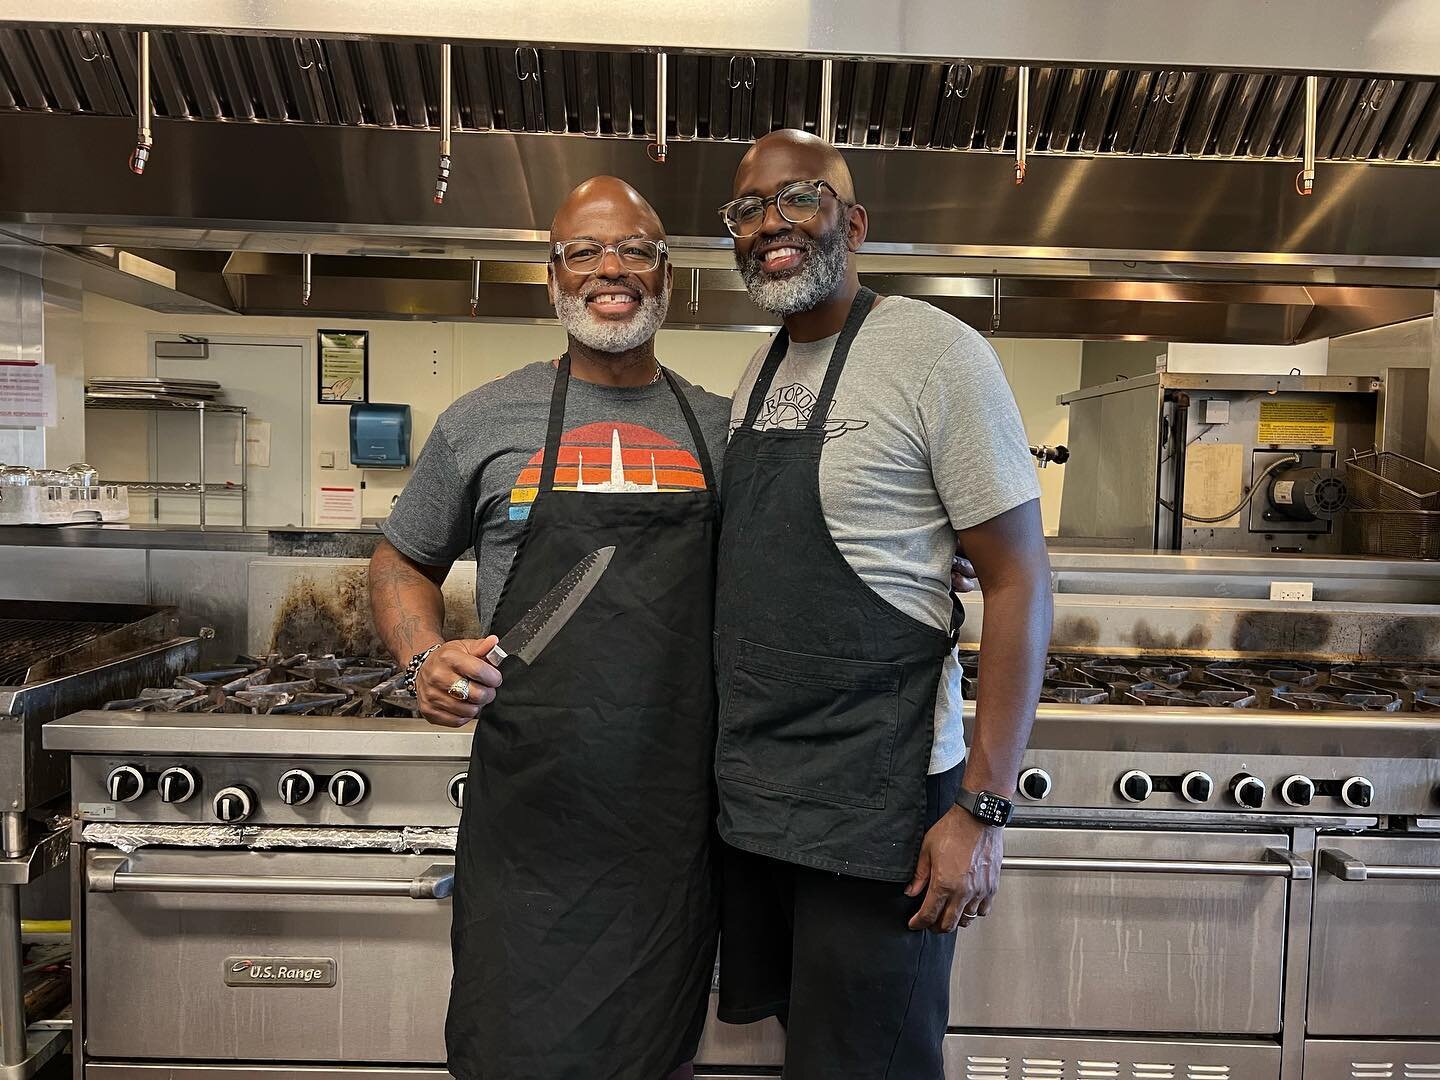 I had such a amazing time prepping for events at my kitchen with my Big bro @neonumanate some people say we look alike😃#brothers #richardstoogoodseattlebbq #richardstoogoodproducts #catering #bbq #dinner #lunch #sauce #seasoning #fun #goodtimes #kit